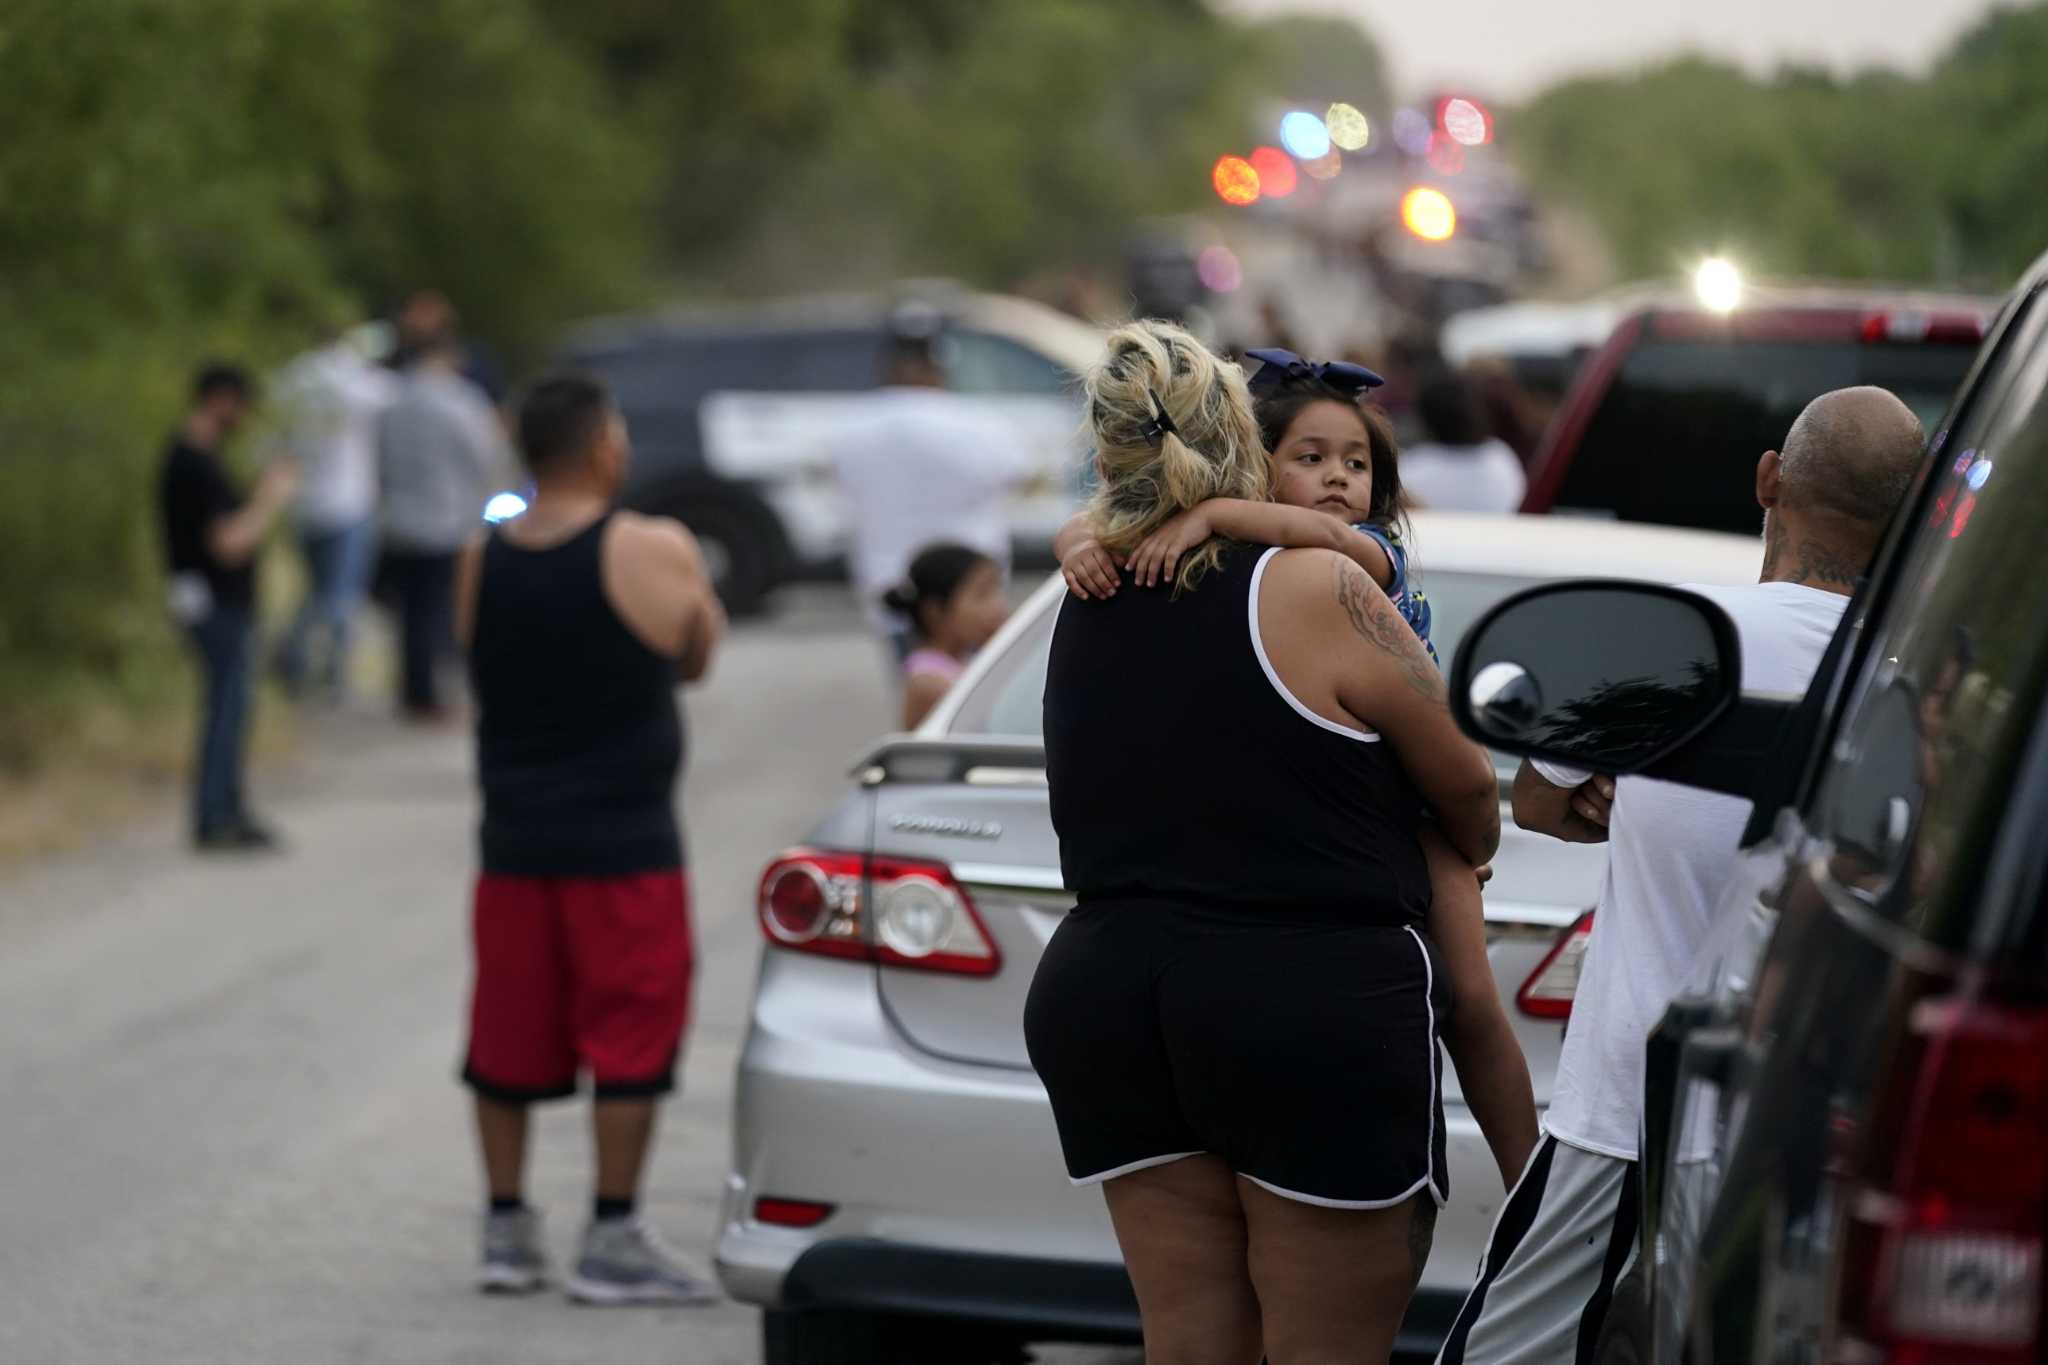 San Antonio, Texas officials respond to deaths of 46 people found in